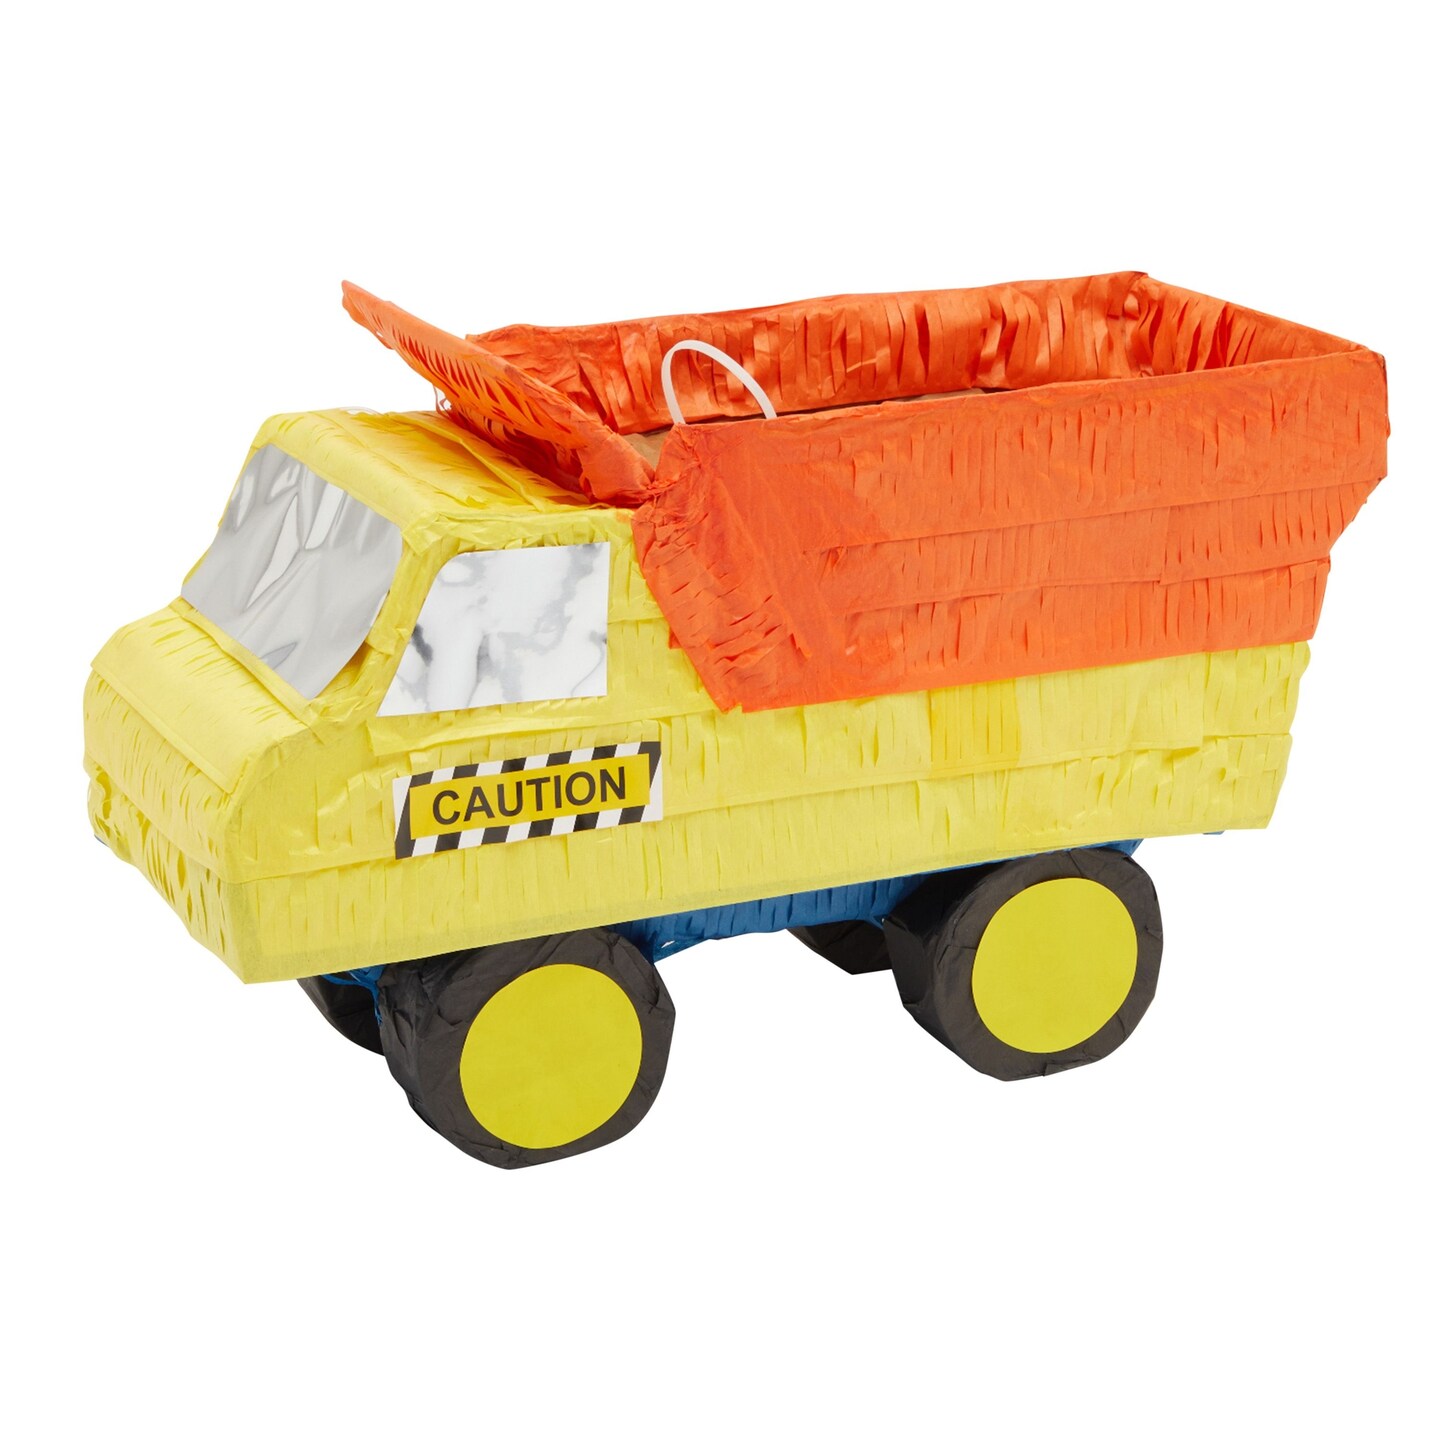 Dump Truck Pinata - Kids Construction Birthday Party Supplies, Construction Party Decorations (Small, 15.5x9x6 In)